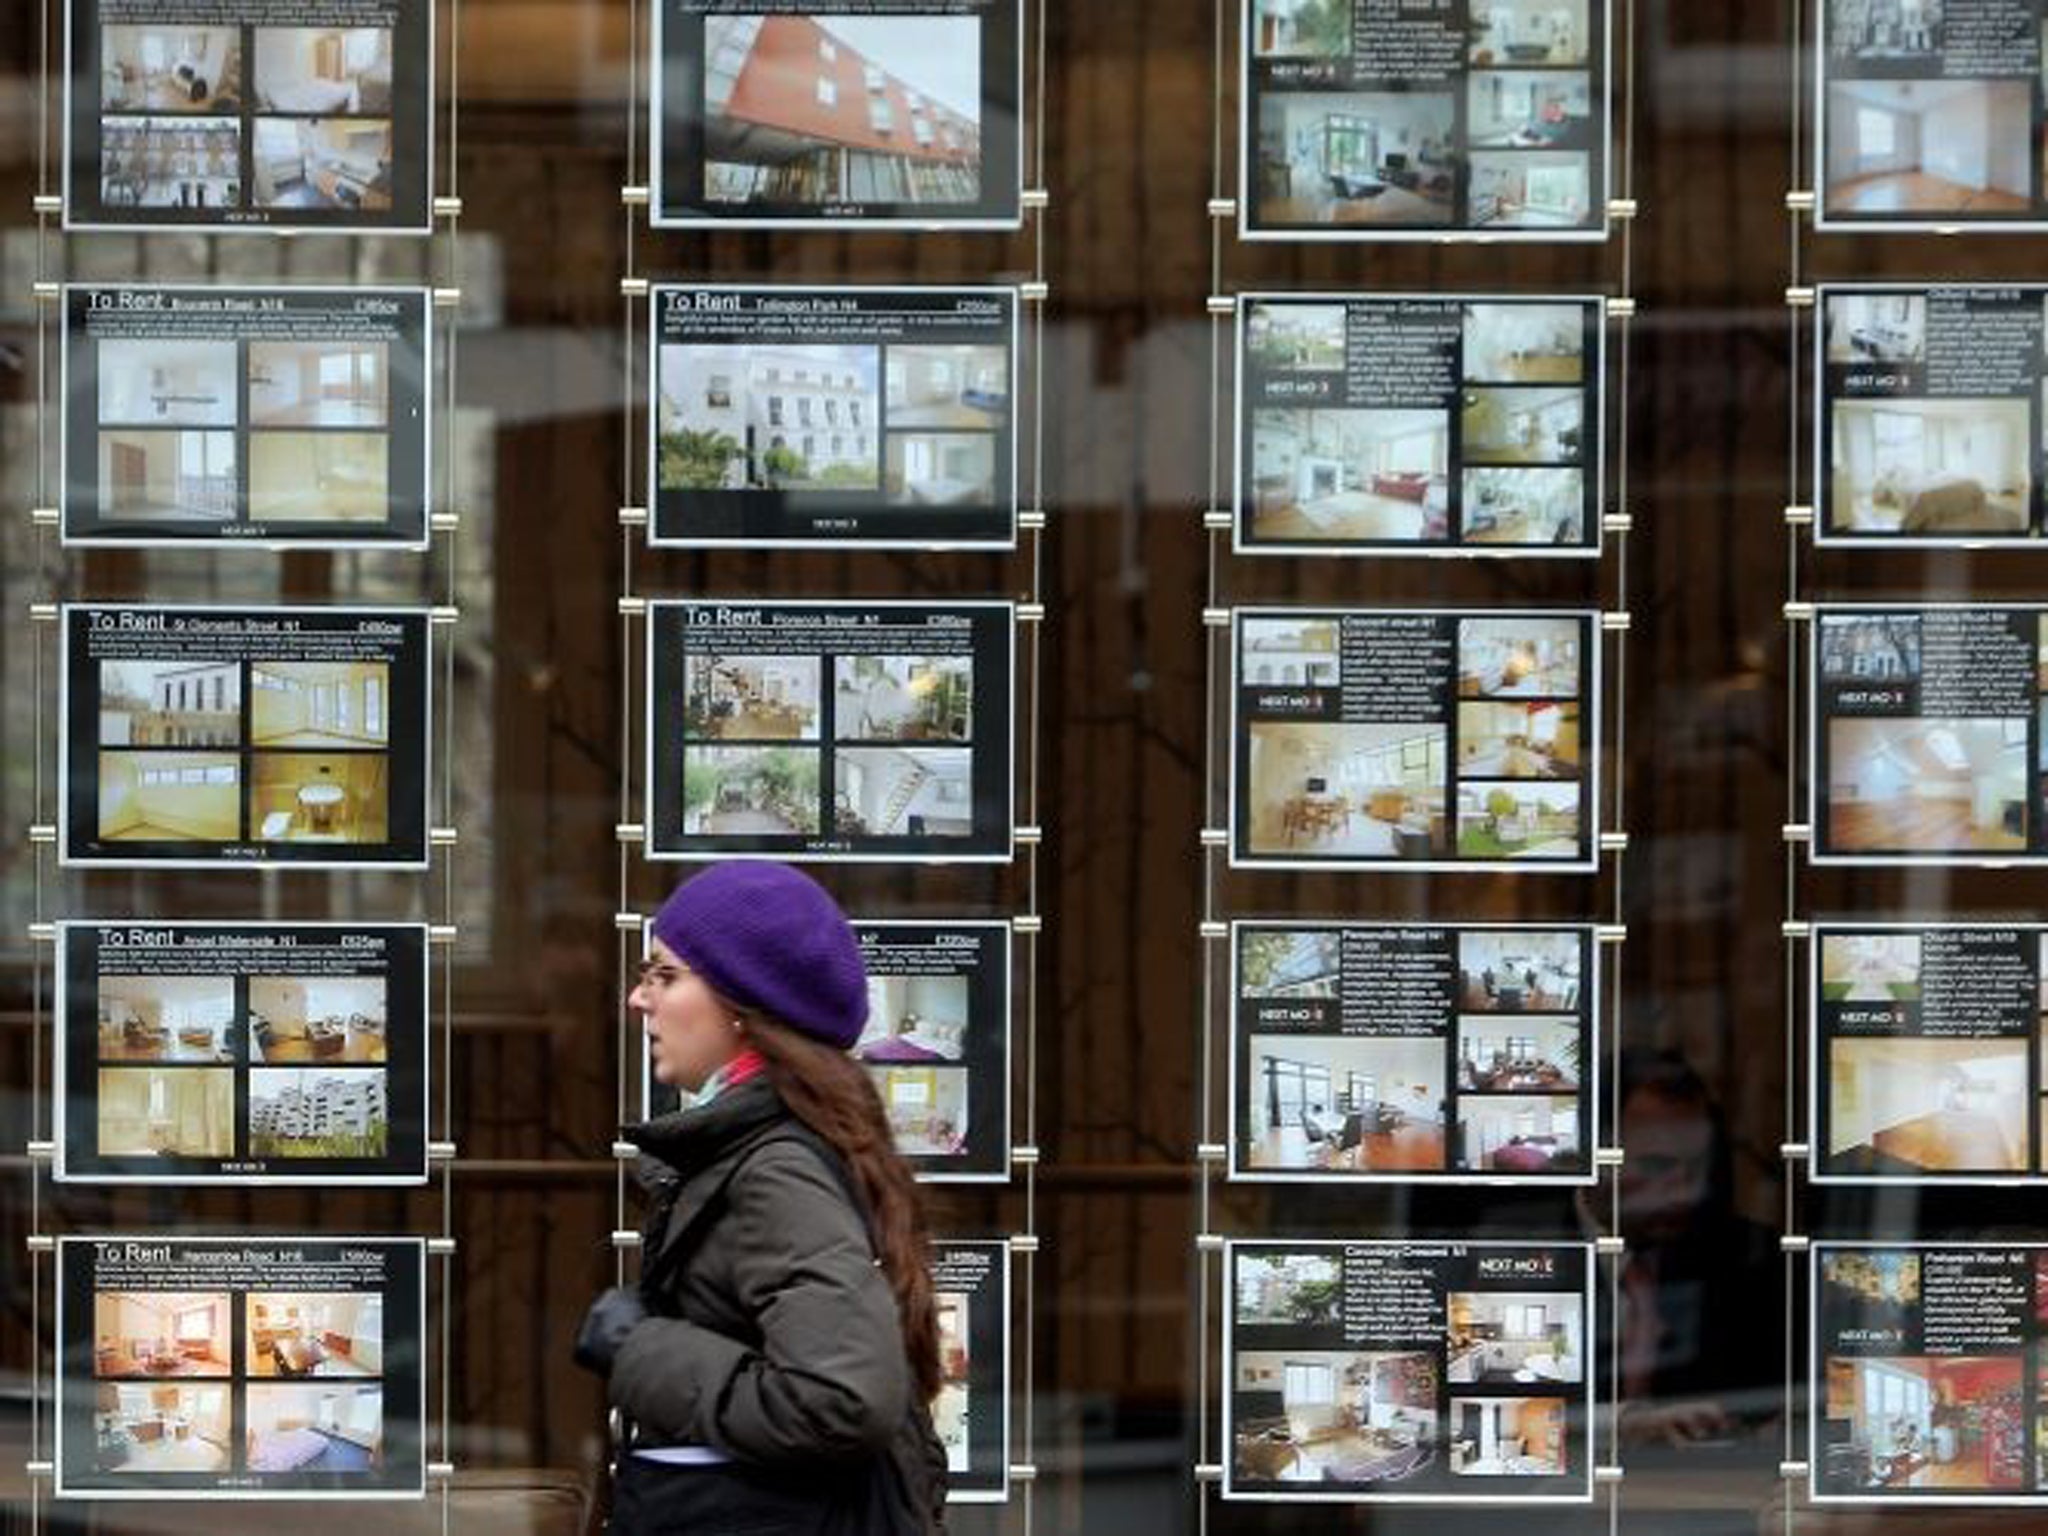 House prices climbed by 1.9% year-on-year in February